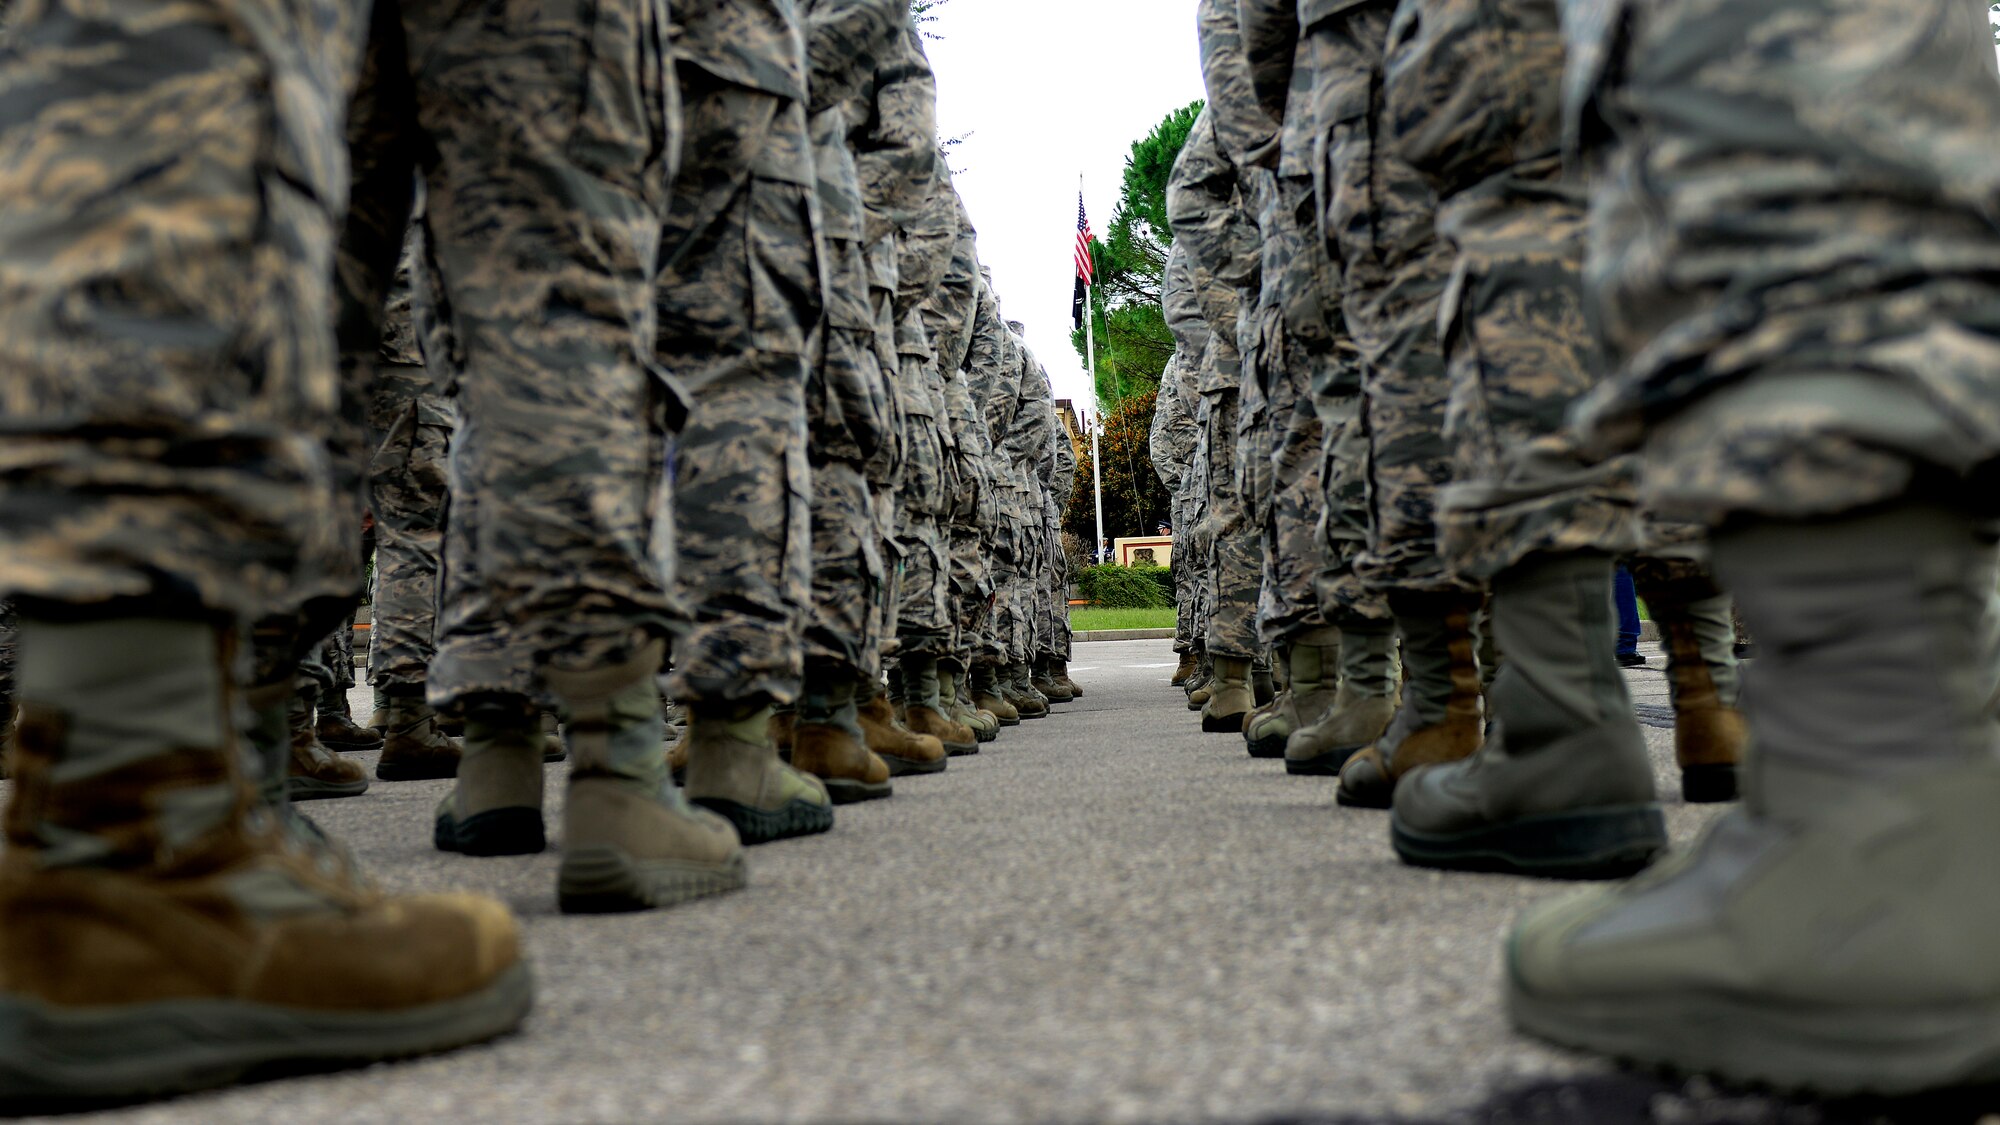 U.S. Air Force Airmen stand in formation during the Prisoner of War/Missing in Action Remembrance Week retreat ceremony Sept. 17, 2015, at Aviano Air Base, Italy. The Air Force Sergeants Association hosted several events during the week, including a vigil run and table ceremony to remember fellow service members. (U.S. Air Force photo by Senior Airman Areca T. Bell/Released)